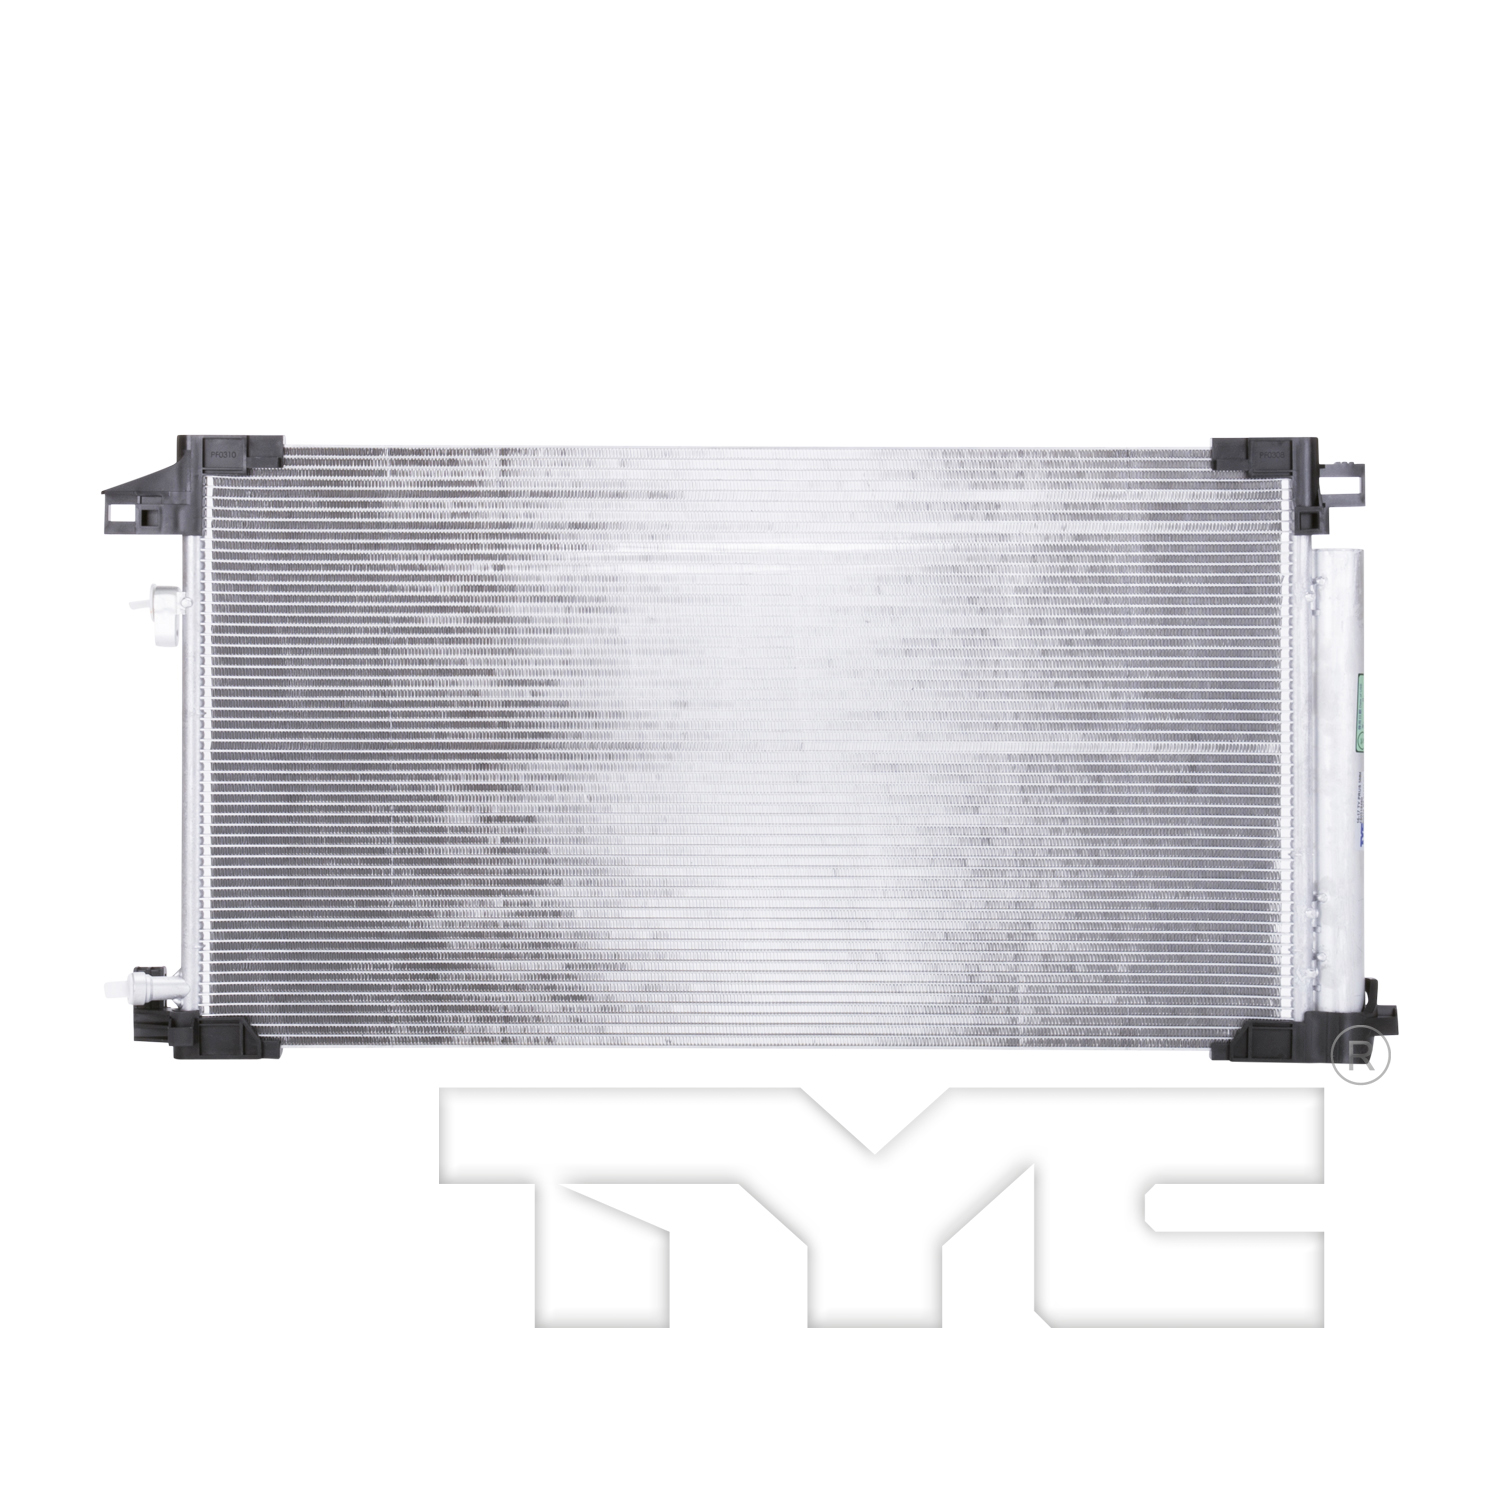 Aftermarket AC CONDENSERS for TOYOTA - COROLLA, COROLLA,20-22,Air conditioning condenser